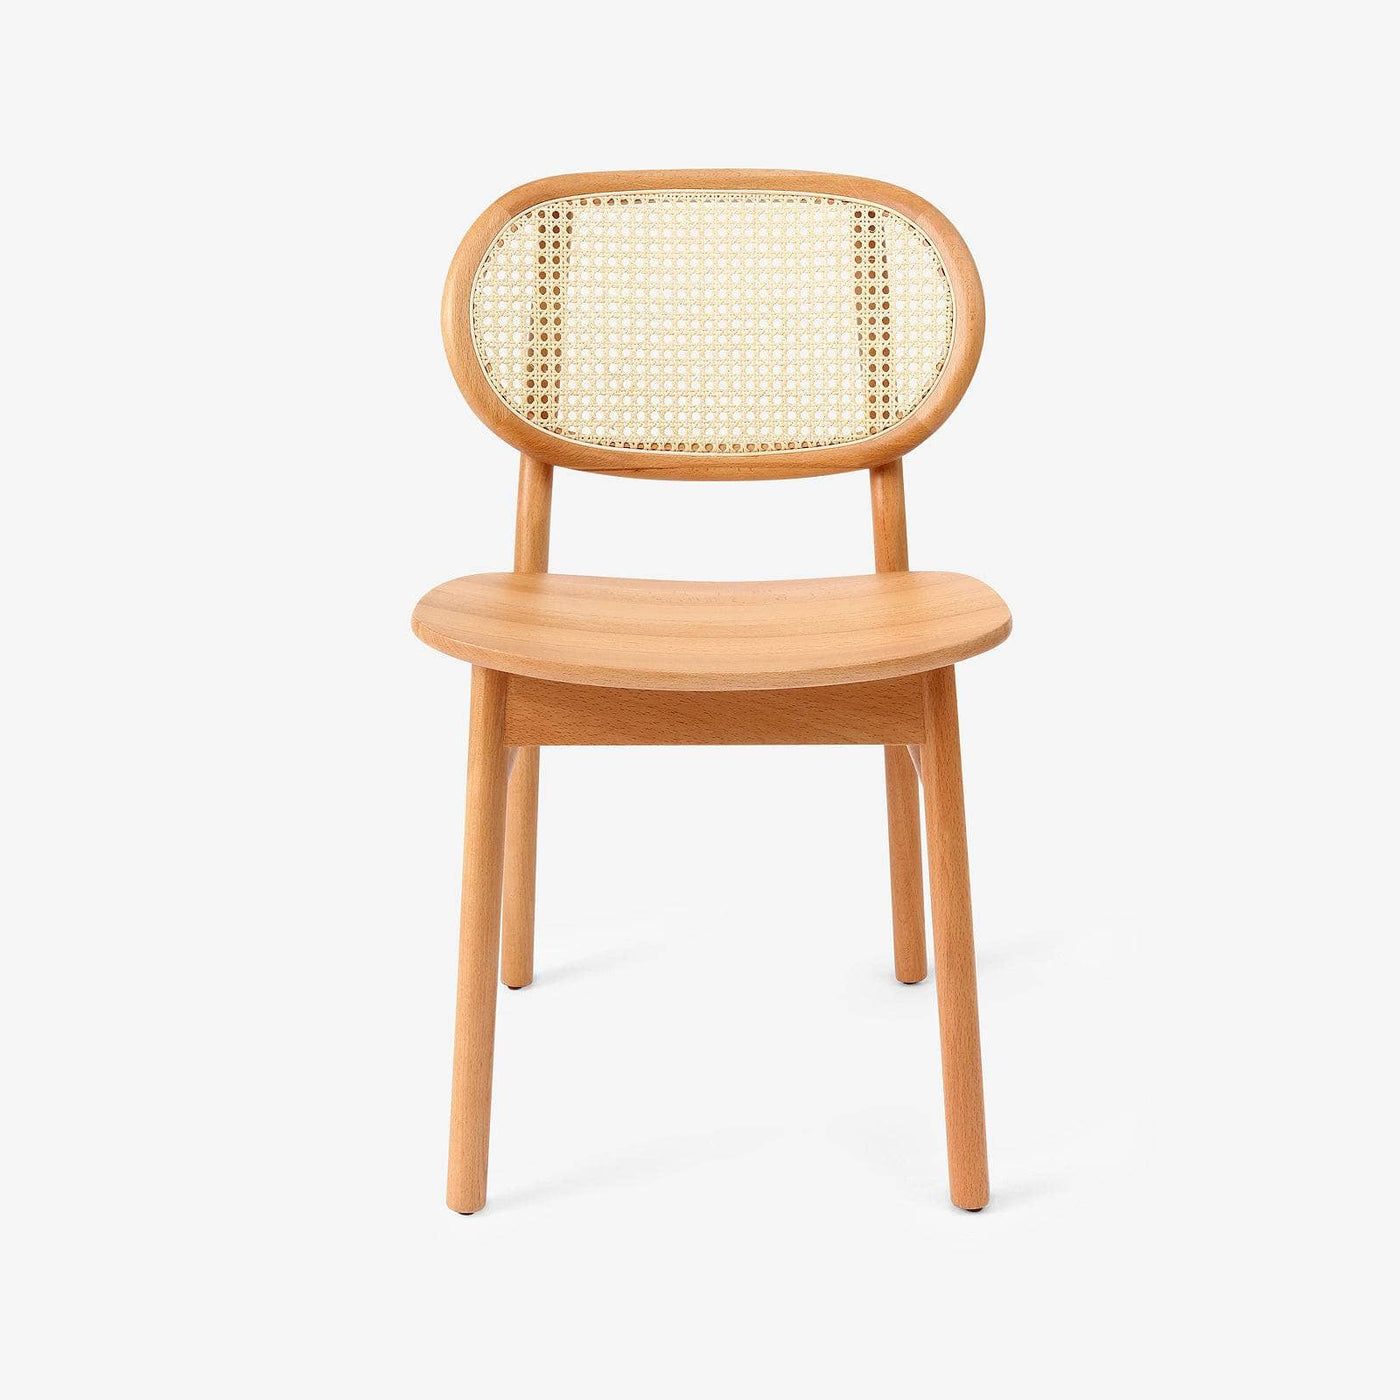 Palermo Wooden Rattan Chair, Wood 1